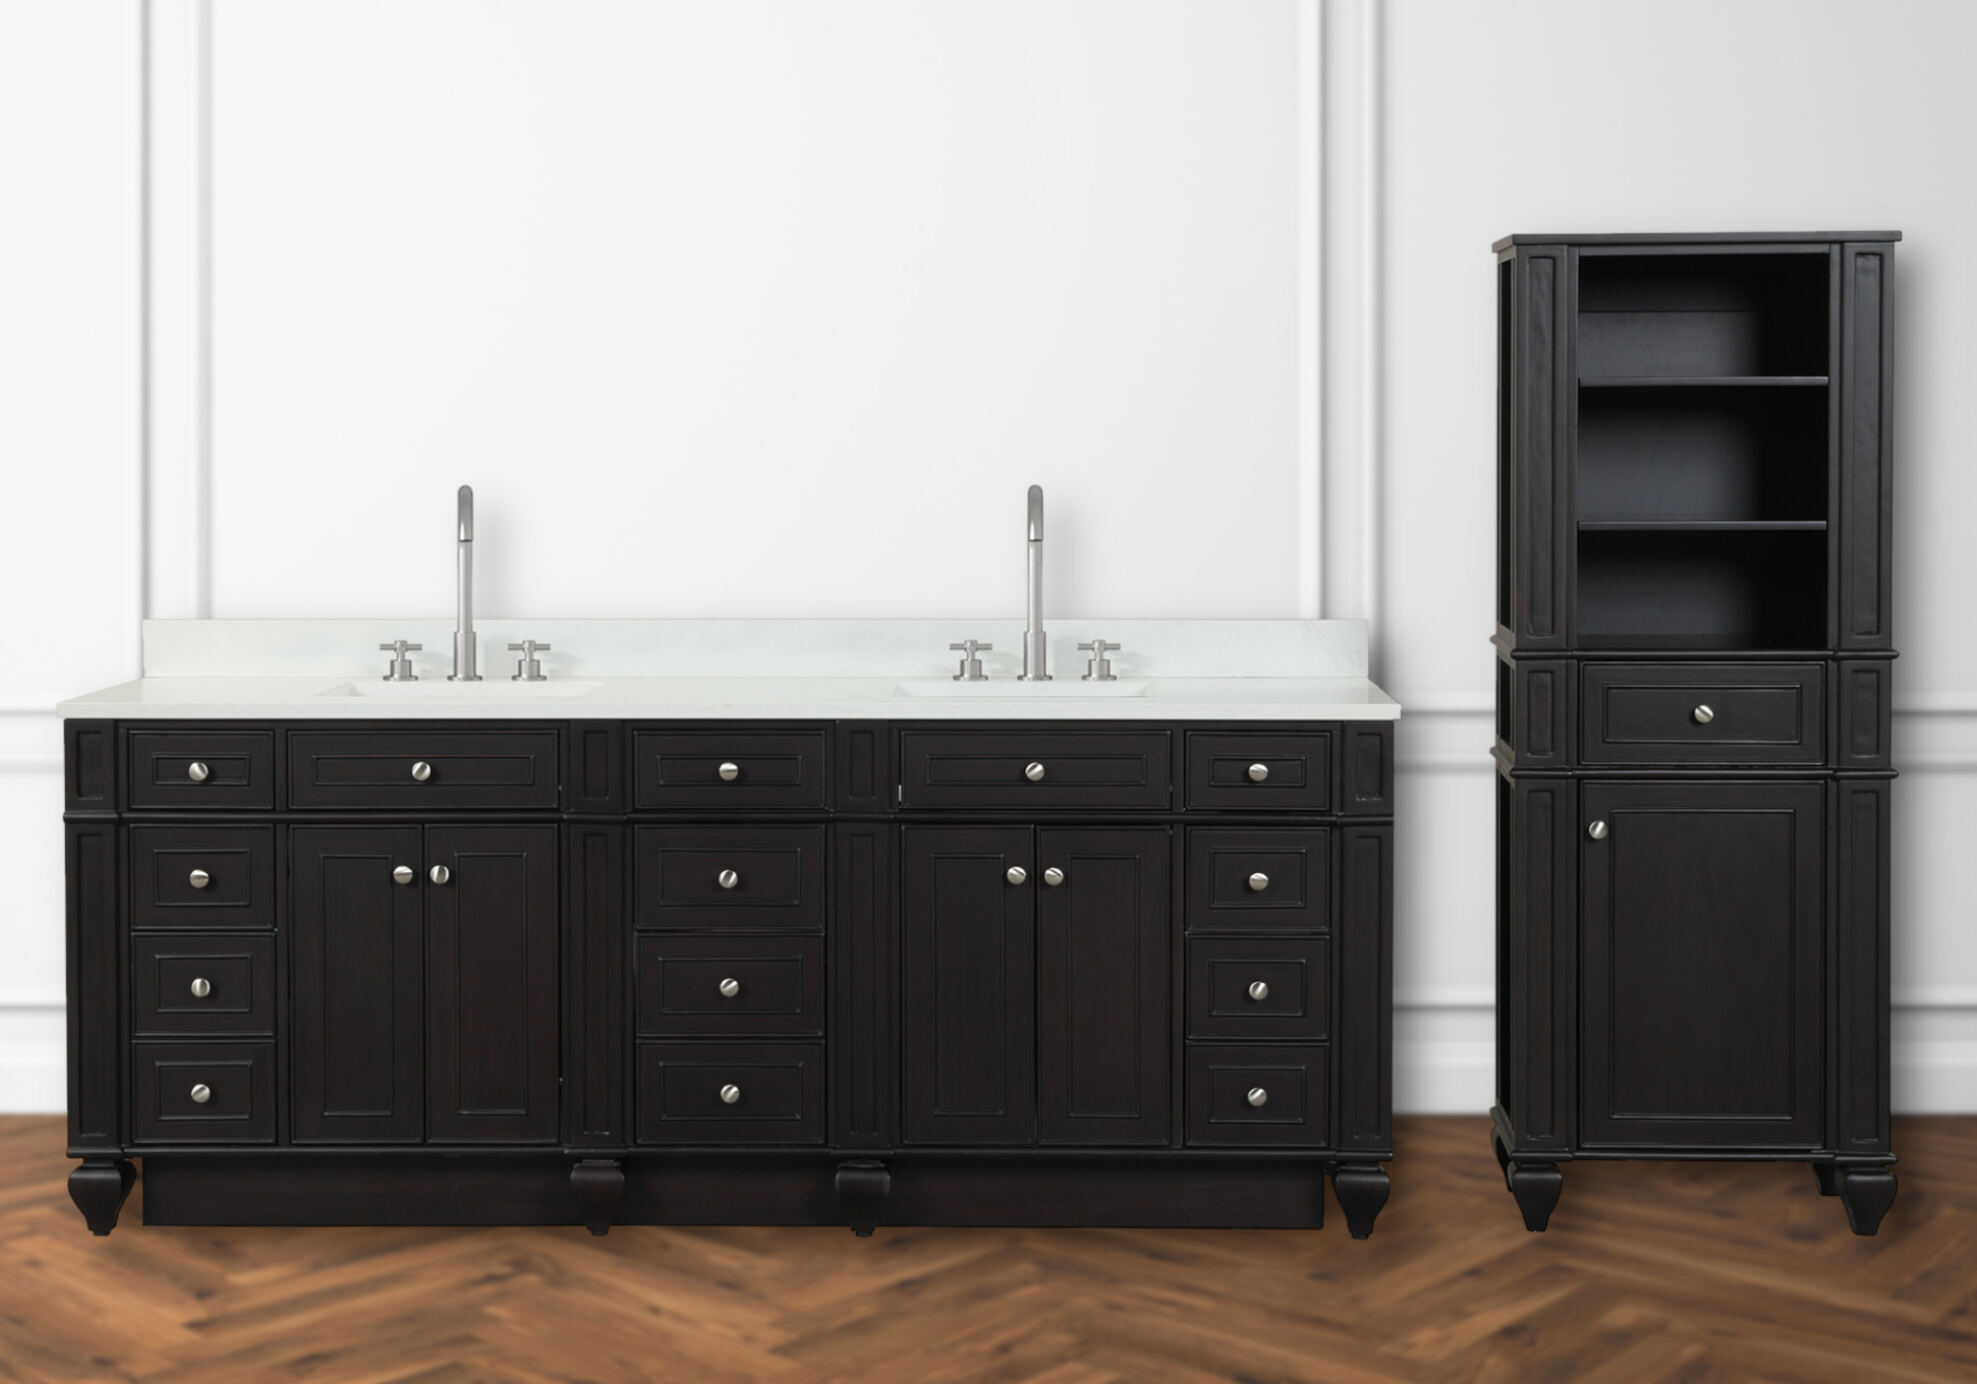 Traditional 84" Double Sink Vanity with 0.75" Thick White Quartz Countertop in Espresso Finish 